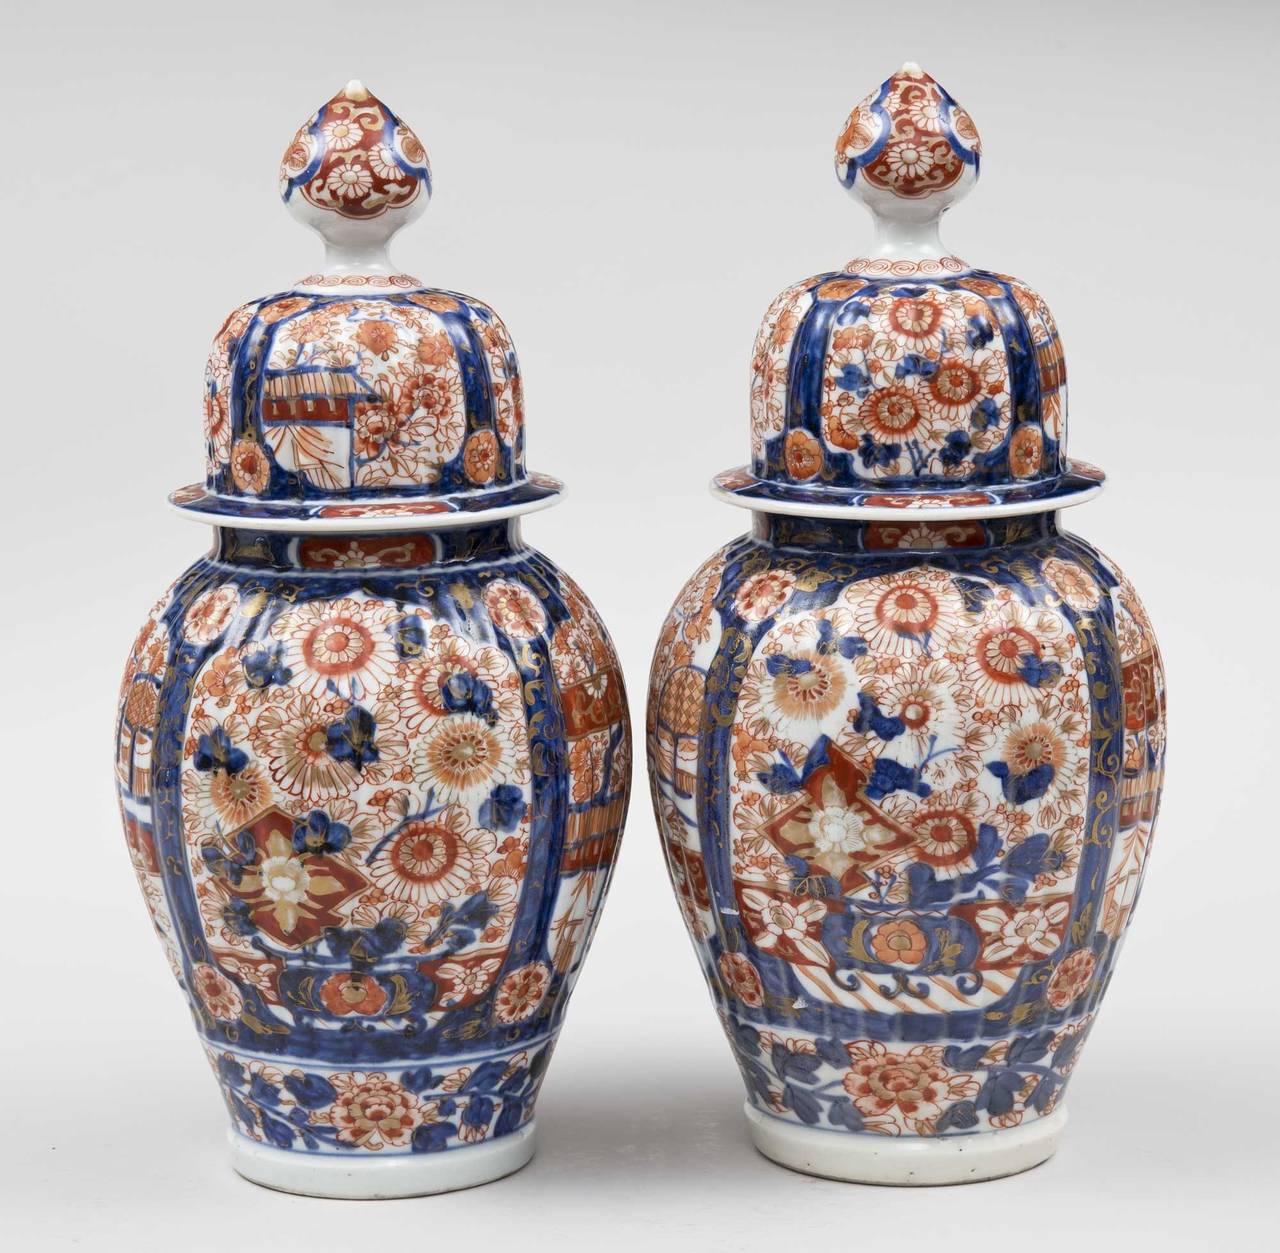 Pair of Imari ribbed vases with covers, the domed and ribbed lid with large finial, four shield-shaped panels on the body decorated with pagodas, trees and flowers in iron red and cobalt blue.

